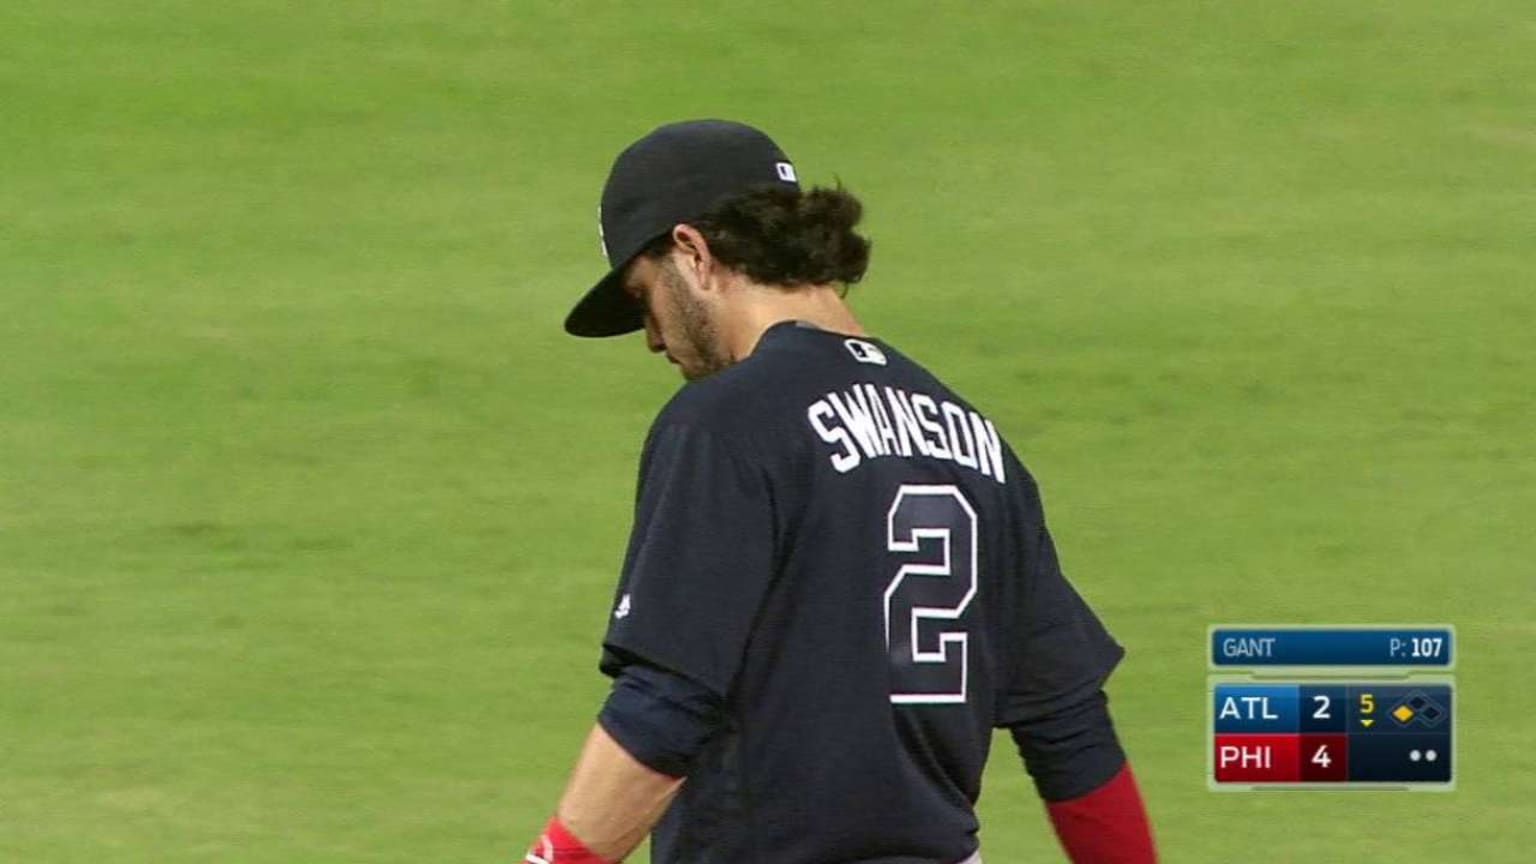 Dansby Swanson slides to the ground to stop Ryan Howard's grounder and...